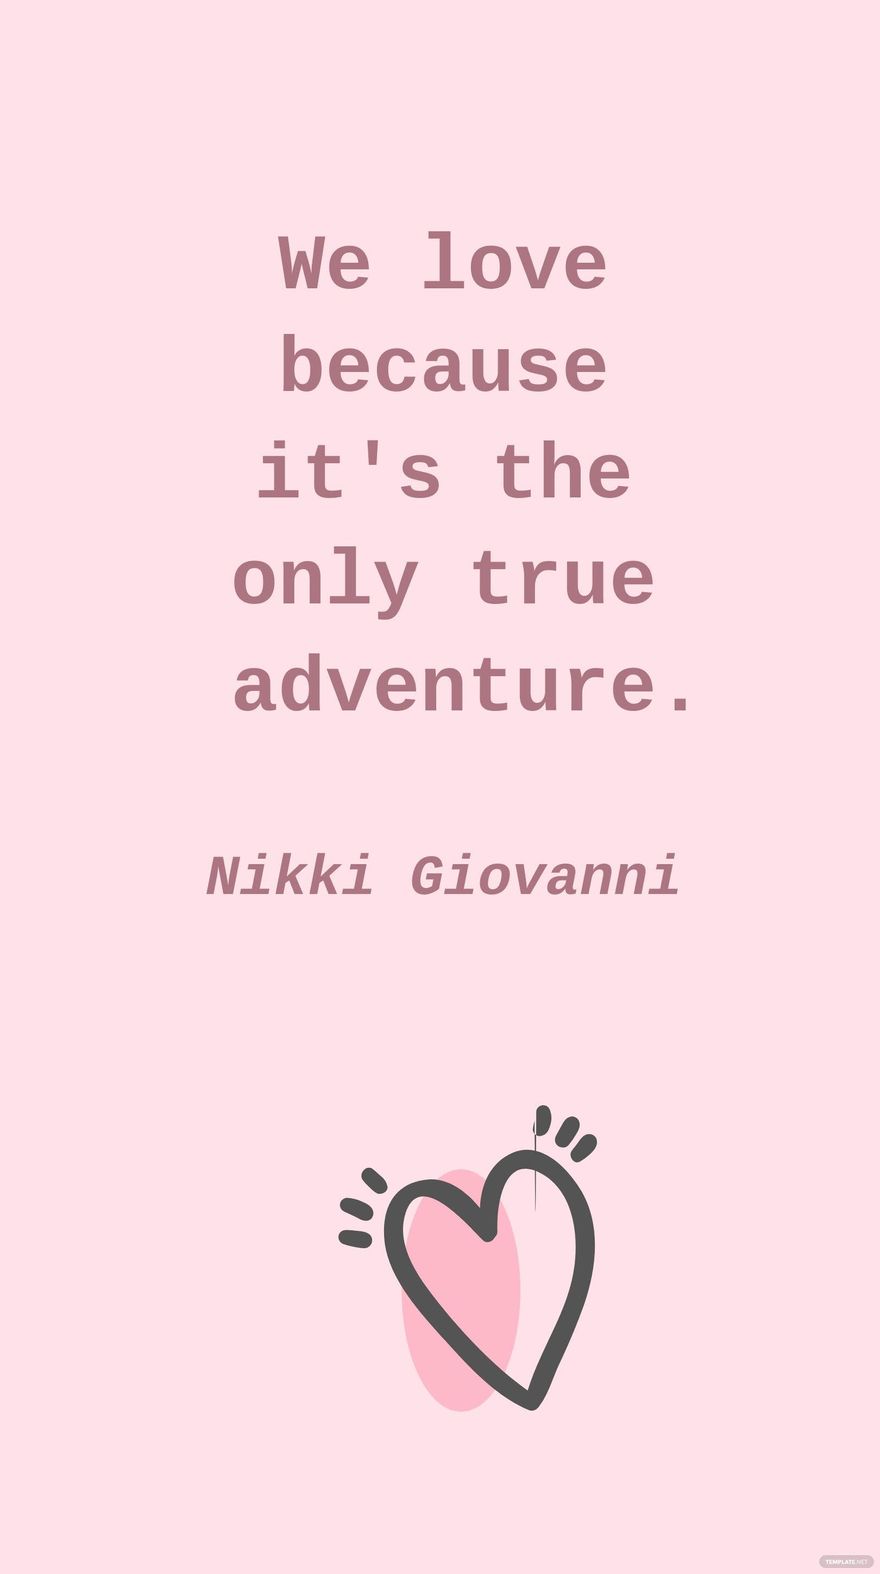 Free Nikki Giovanni - We love because it's the only true adventure. in JPG